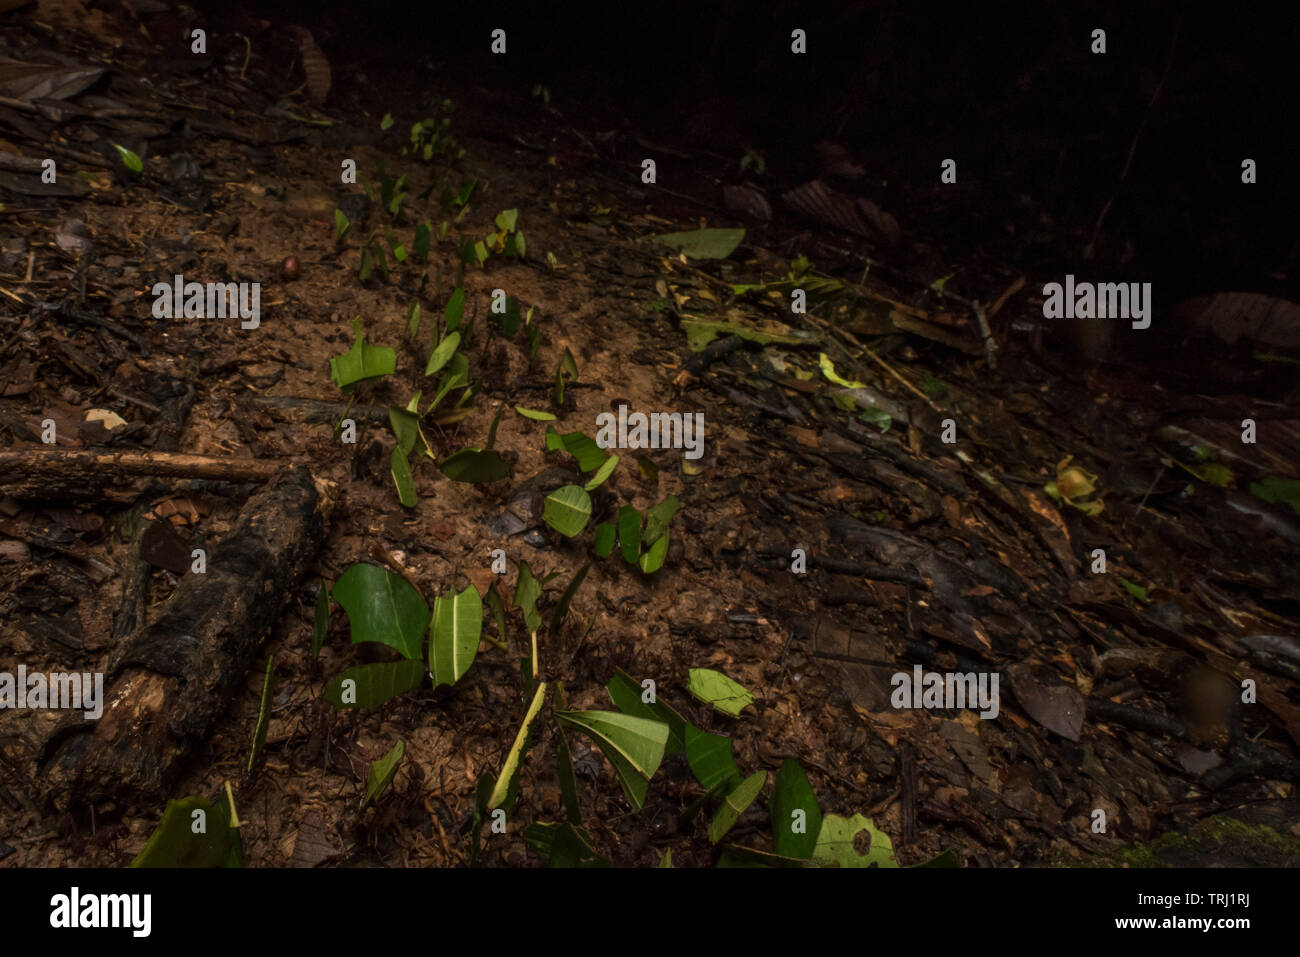 A trail of leaf cutter ants (Atta sp.) carrying the leaves they've cut to the hive along the forest floor in Yasuni national park in the Amazon. Stock Photo